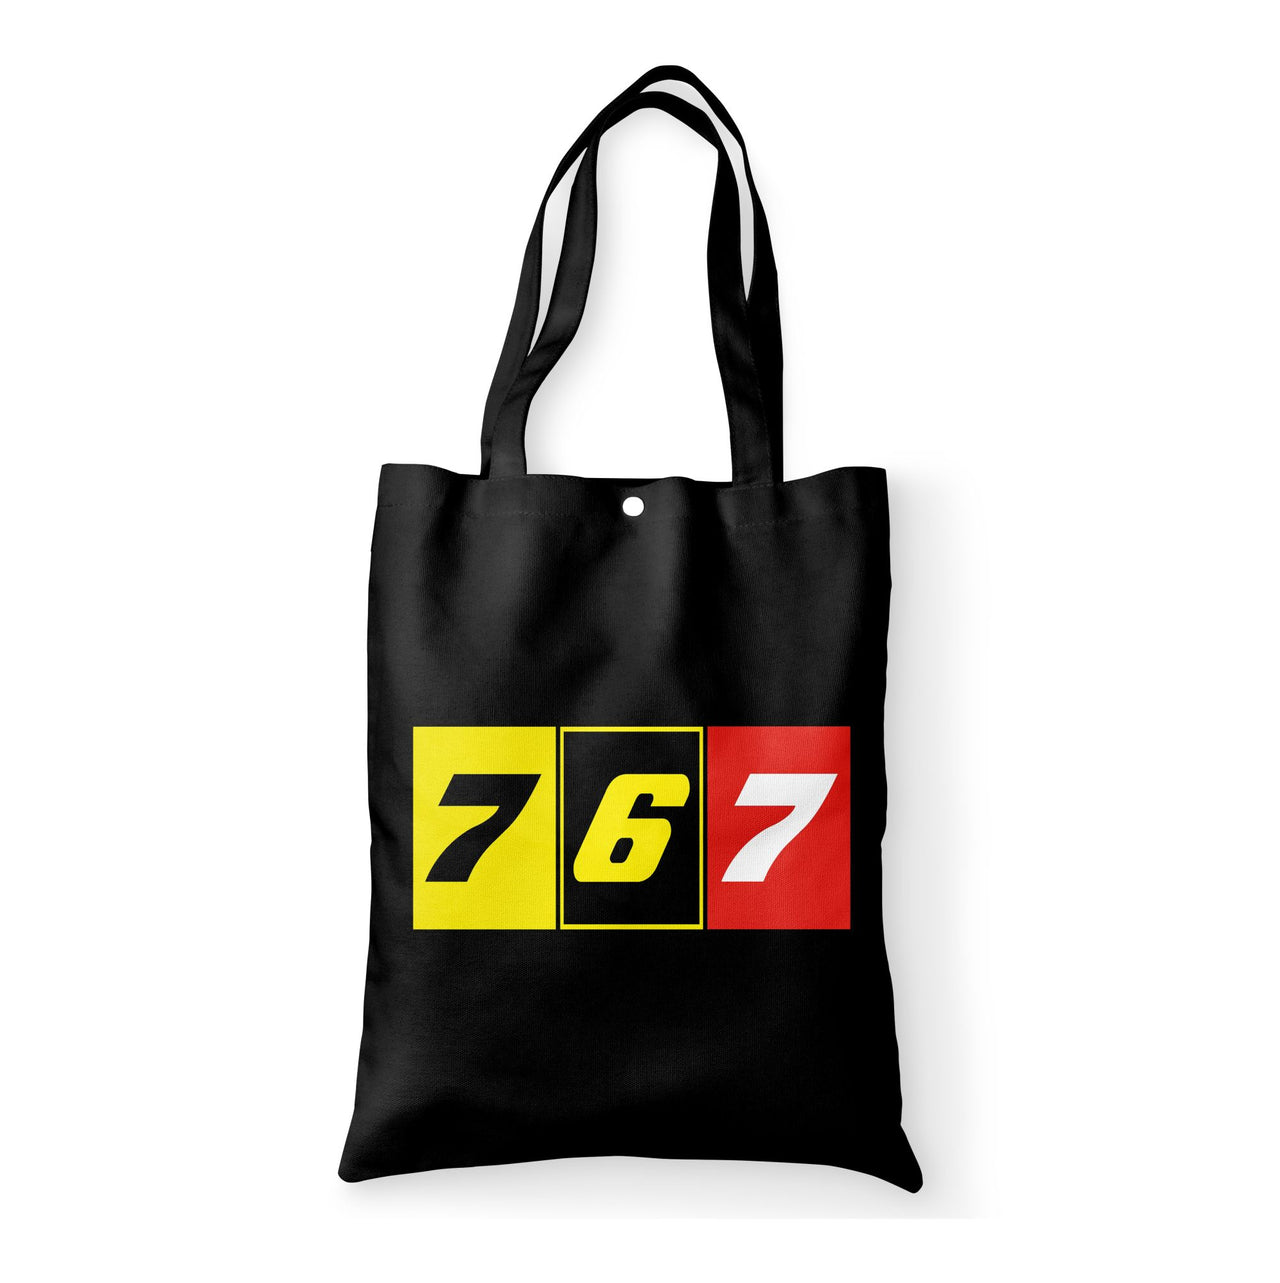 Flat Colourful 767 Designed Tote Bags